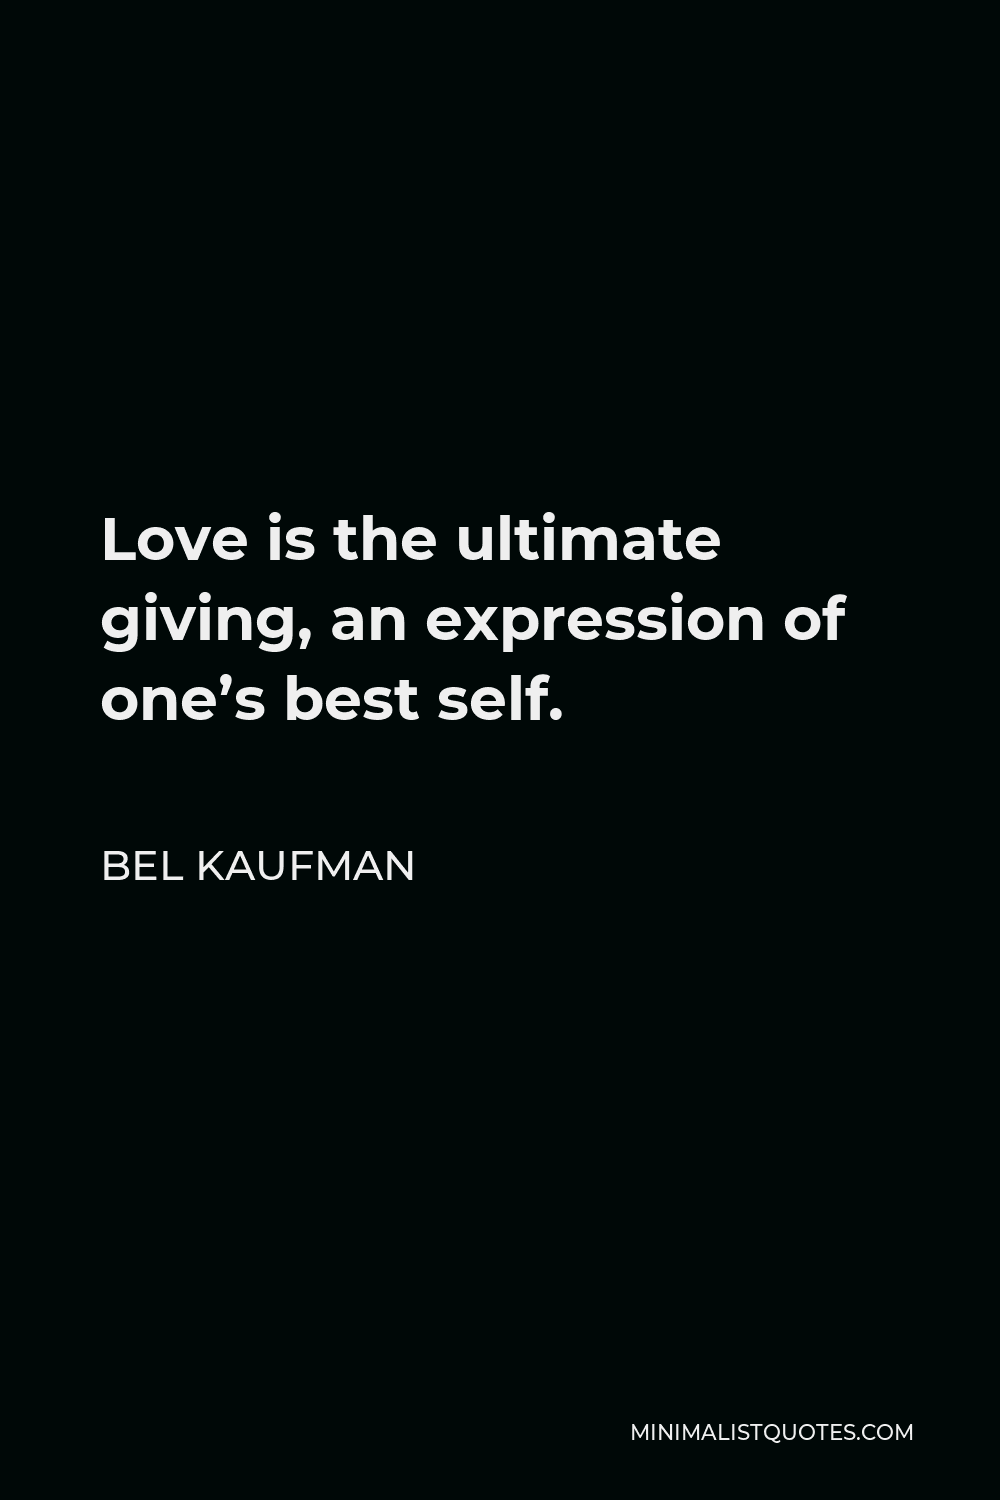 Bel Kaufman Quote - Love is the ultimate giving, an expression of one’s best self.